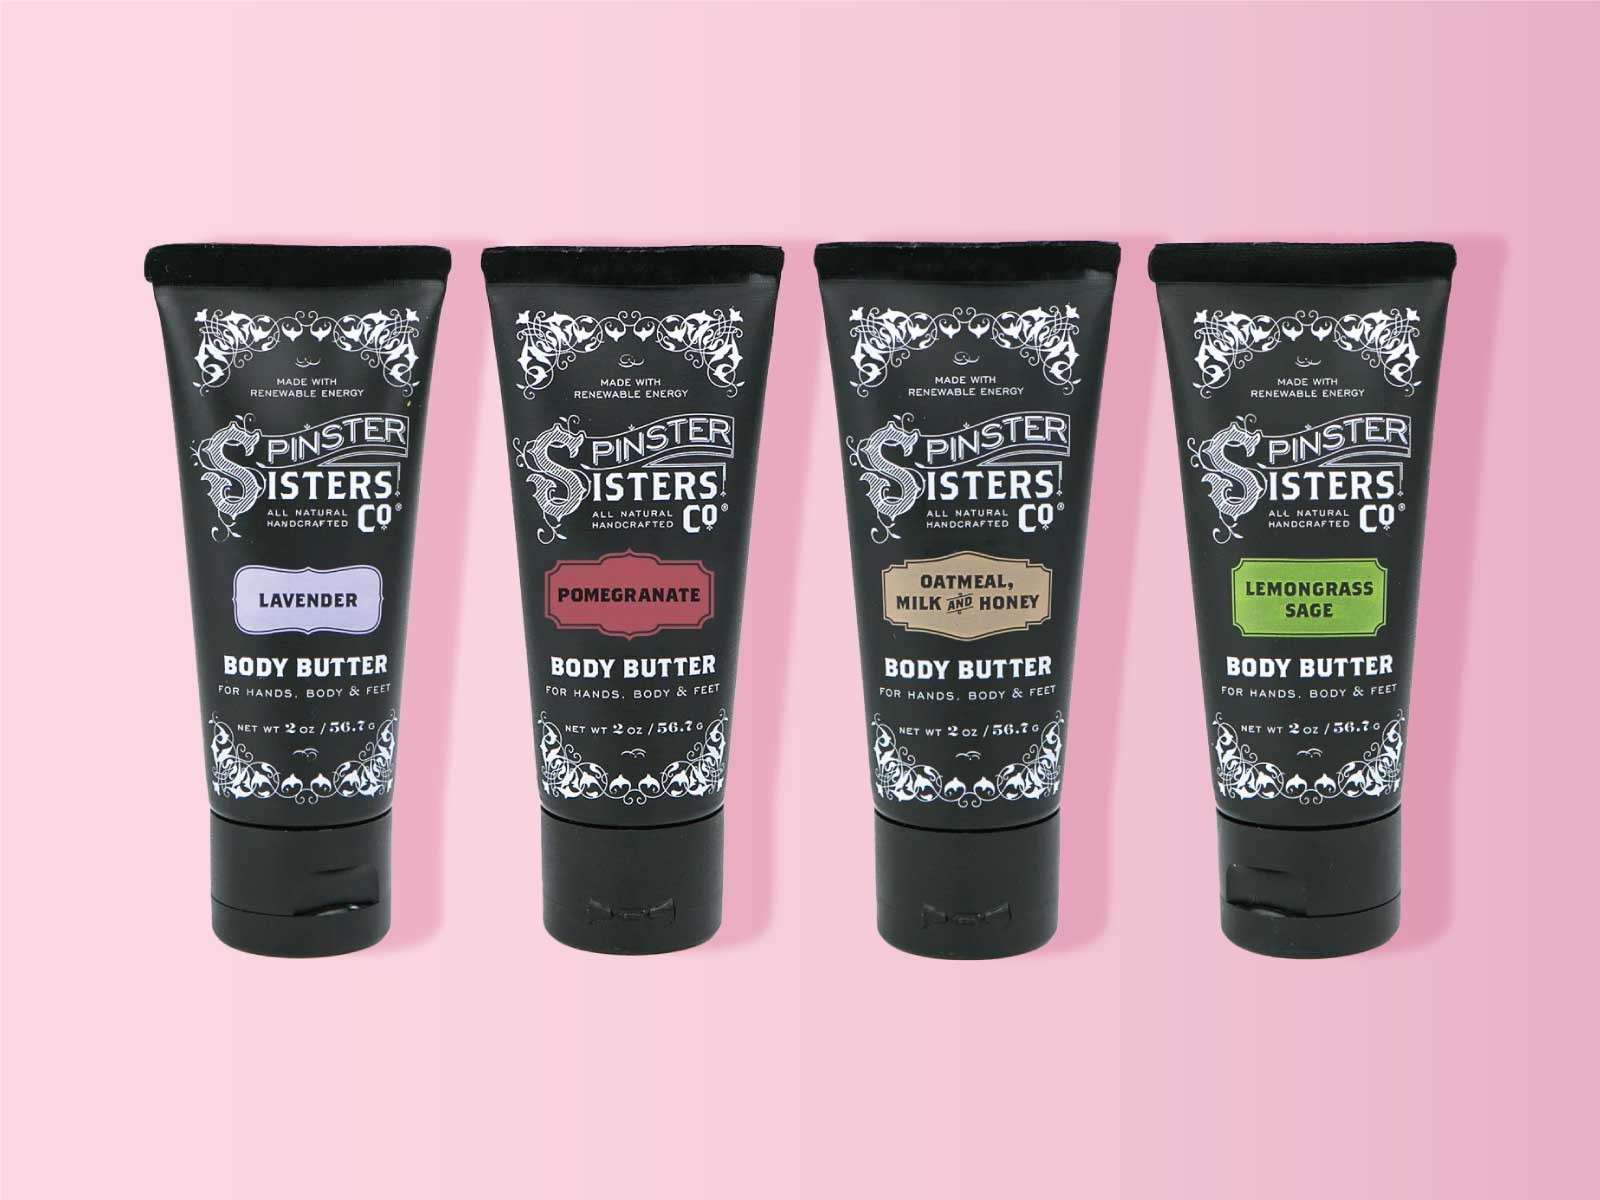 Four black lotion tubes in Lavender, Pomegranate, Oatmeal Milk and Honey, and Lemongrass Sage